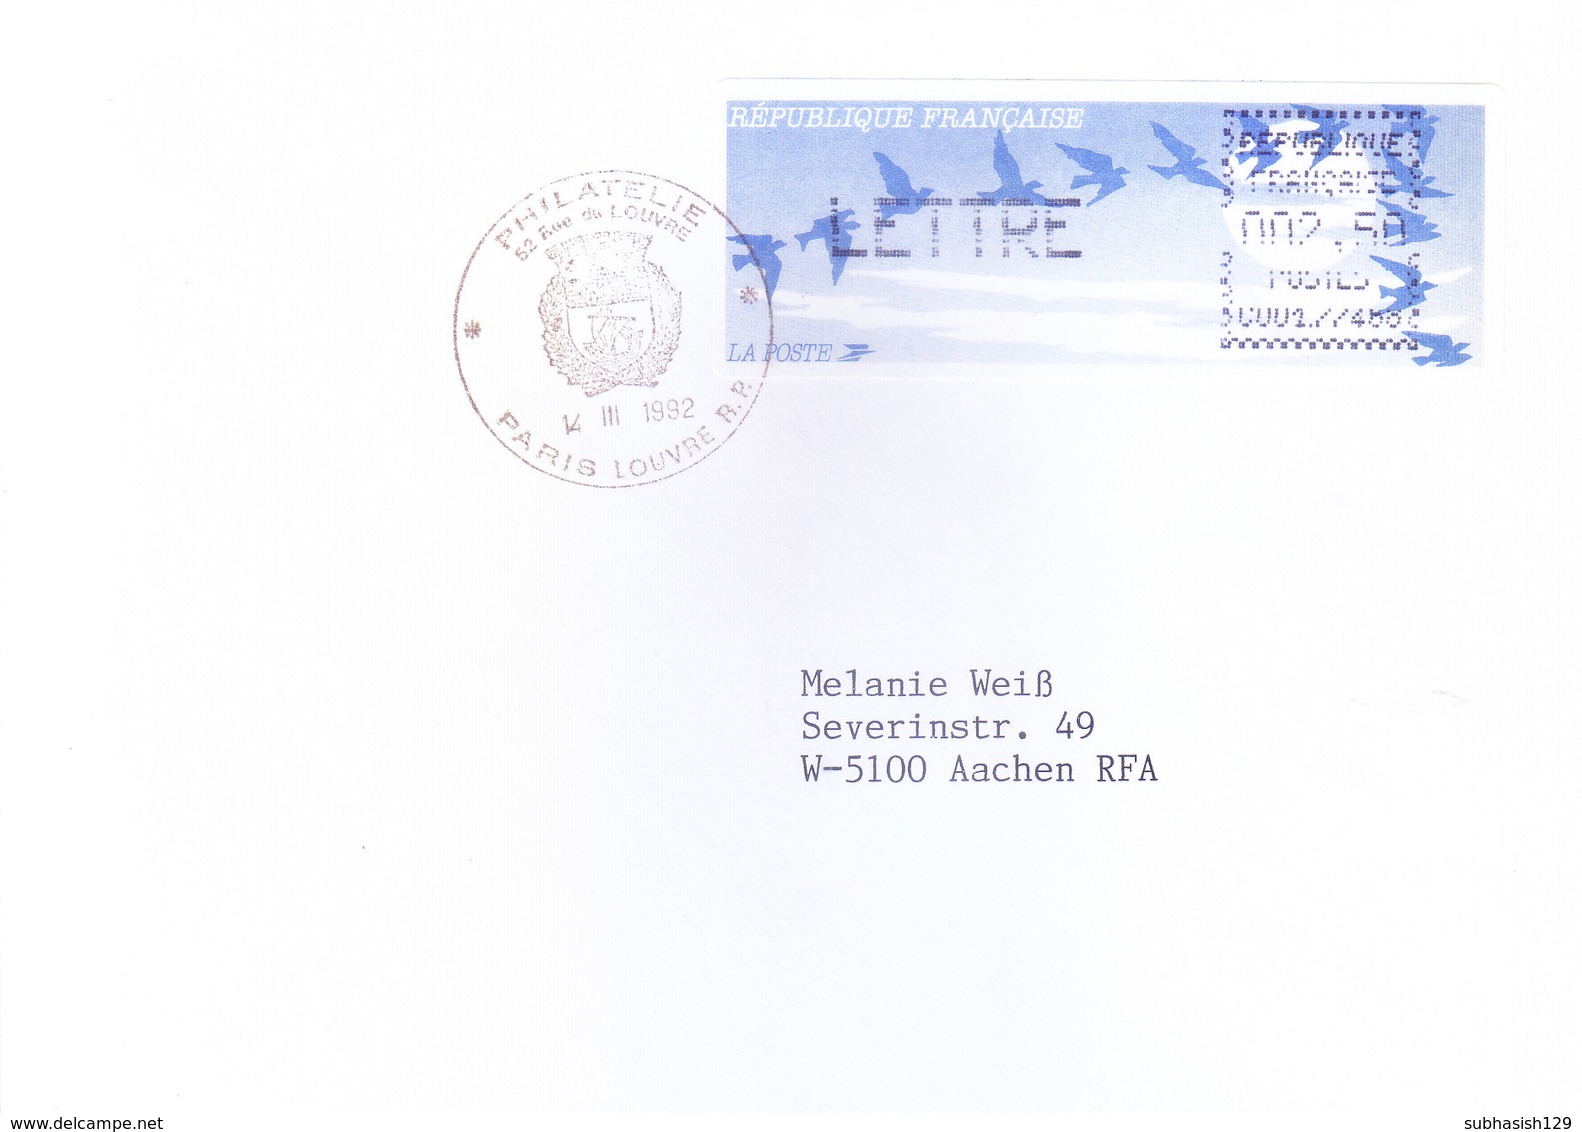 FRANCE : OFFICIAL METER FRANKED POSTAL LABLE WITH CANCELLATION : YEAR 1992 : ISSUED FROM R. P. VOUVRE, PARIS - Covers & Documents